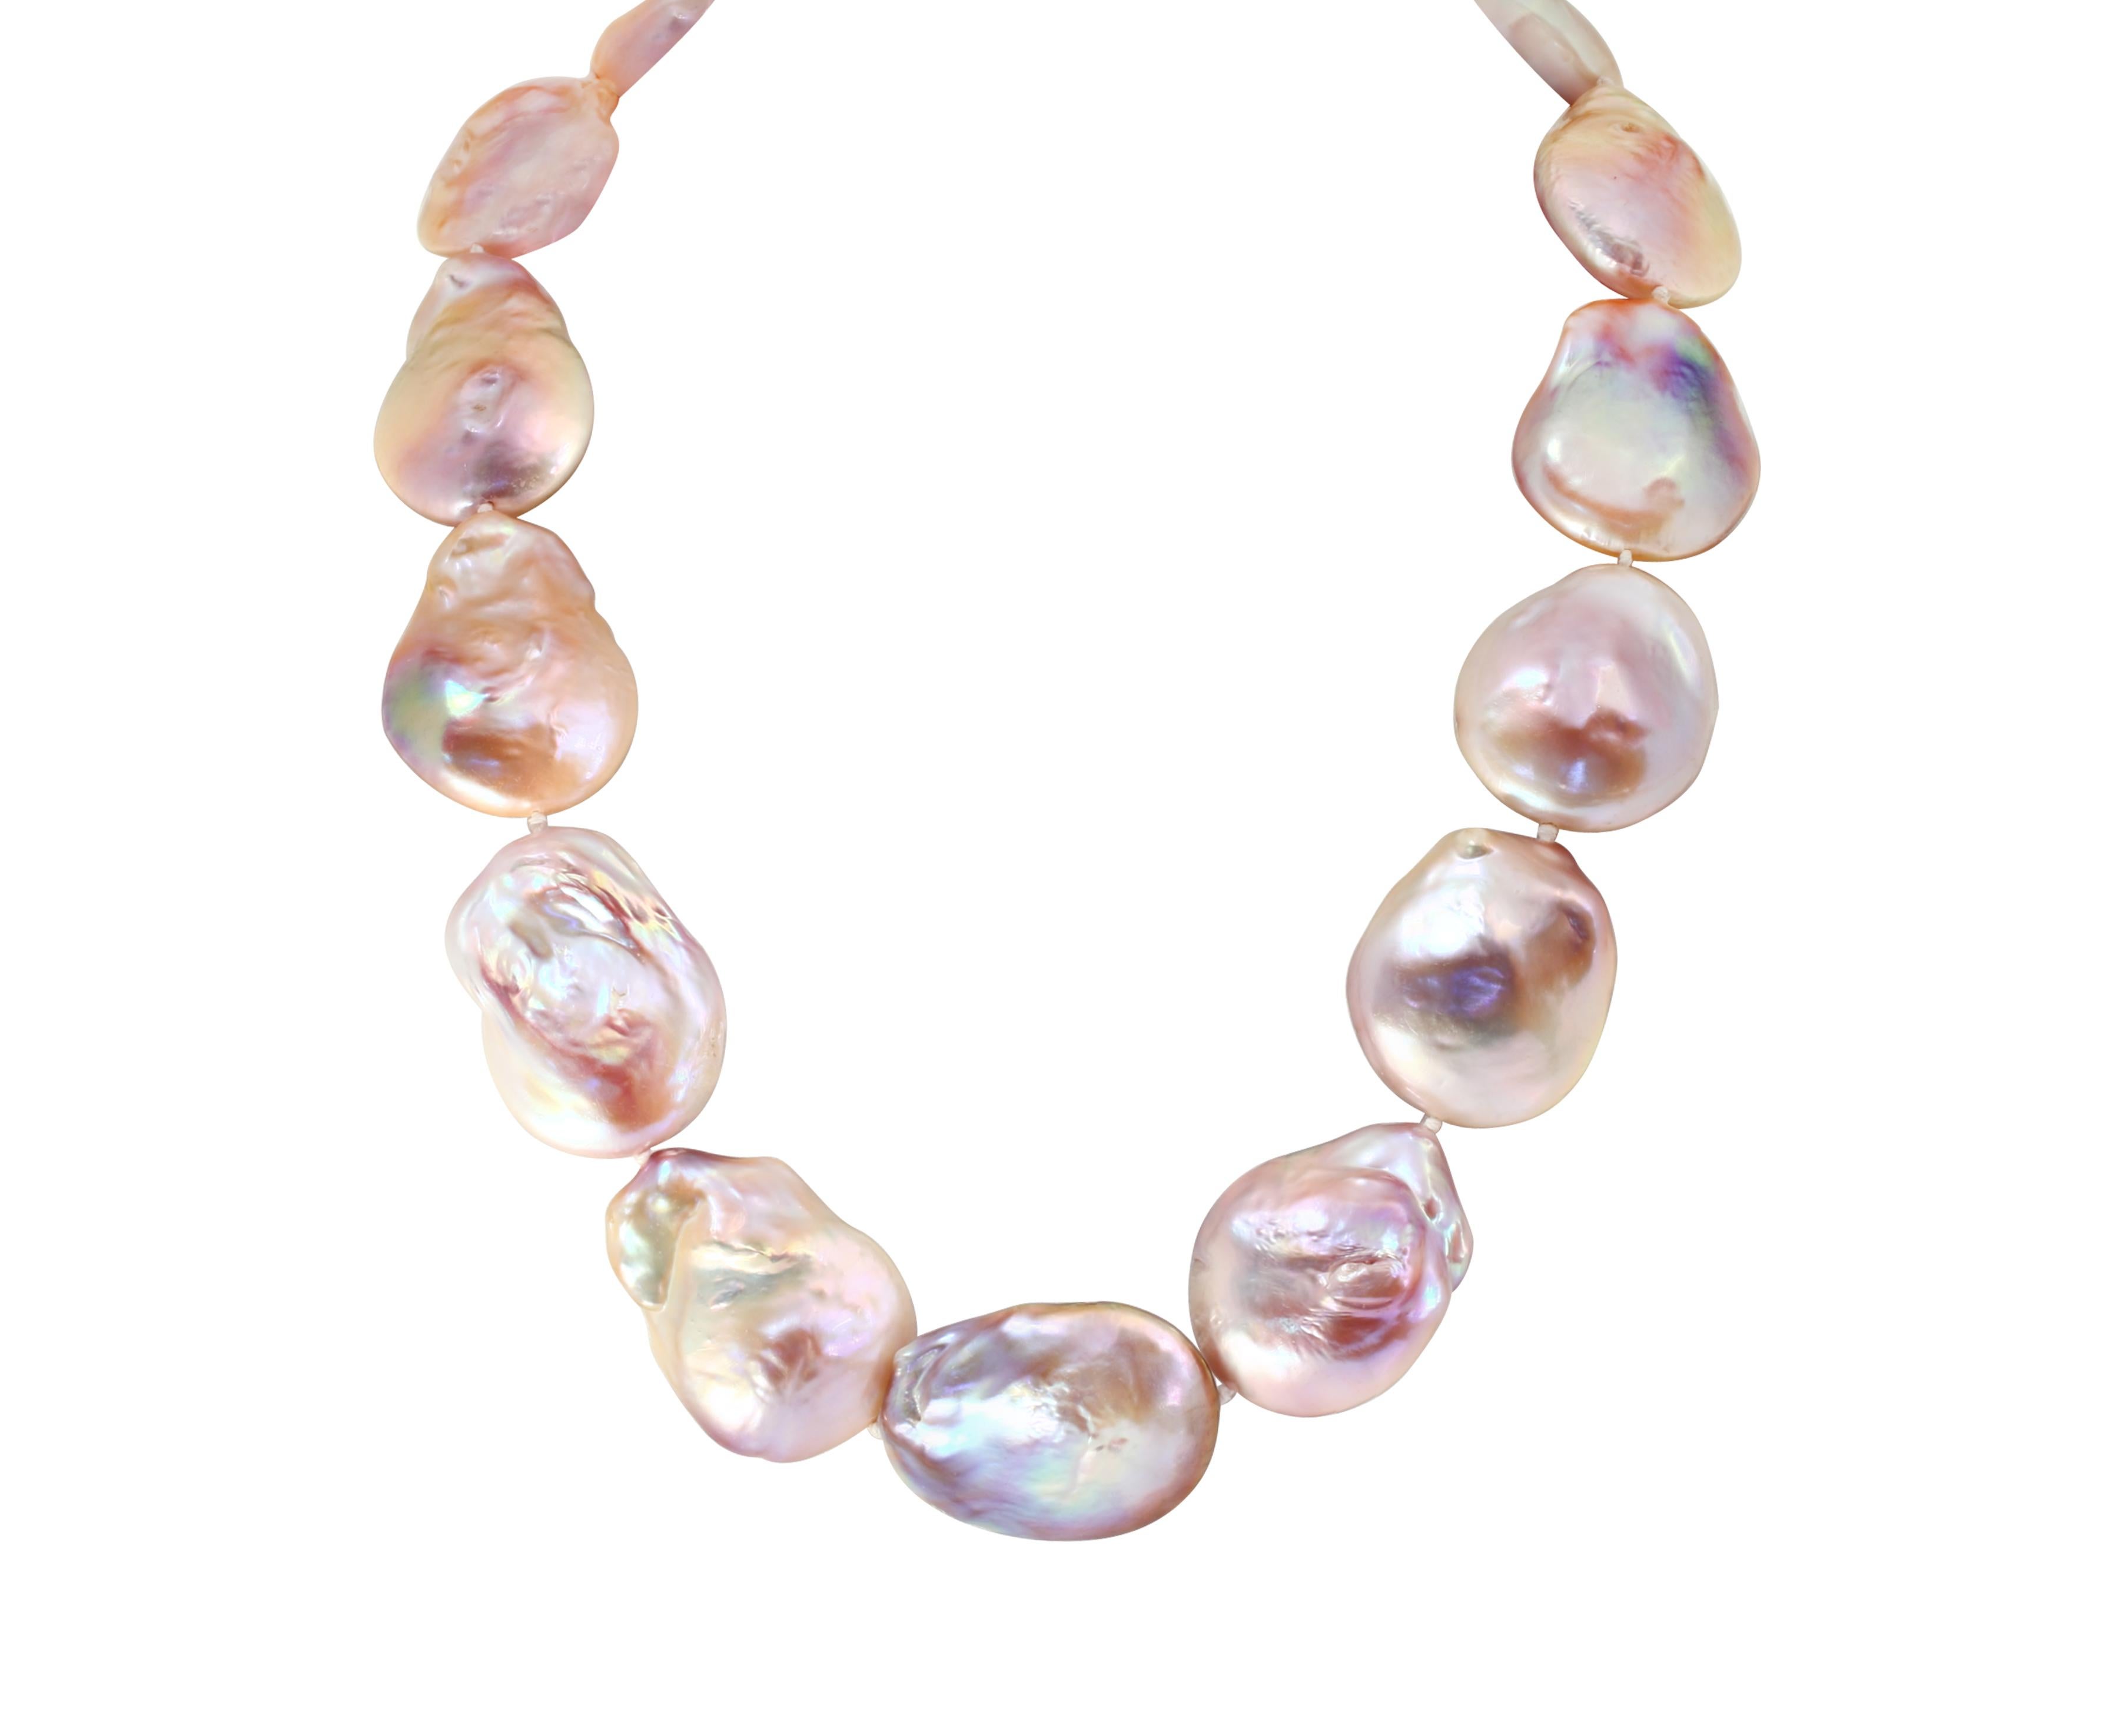 This unique necklace features Chinese freshwater, baroque, natural color pink cultured pearls. The pearls are large, flat, baroque shaped and measure 27x29mm. The necklace is finished with a 13mm, brushed sterling silver yellow ball clasp and is 18